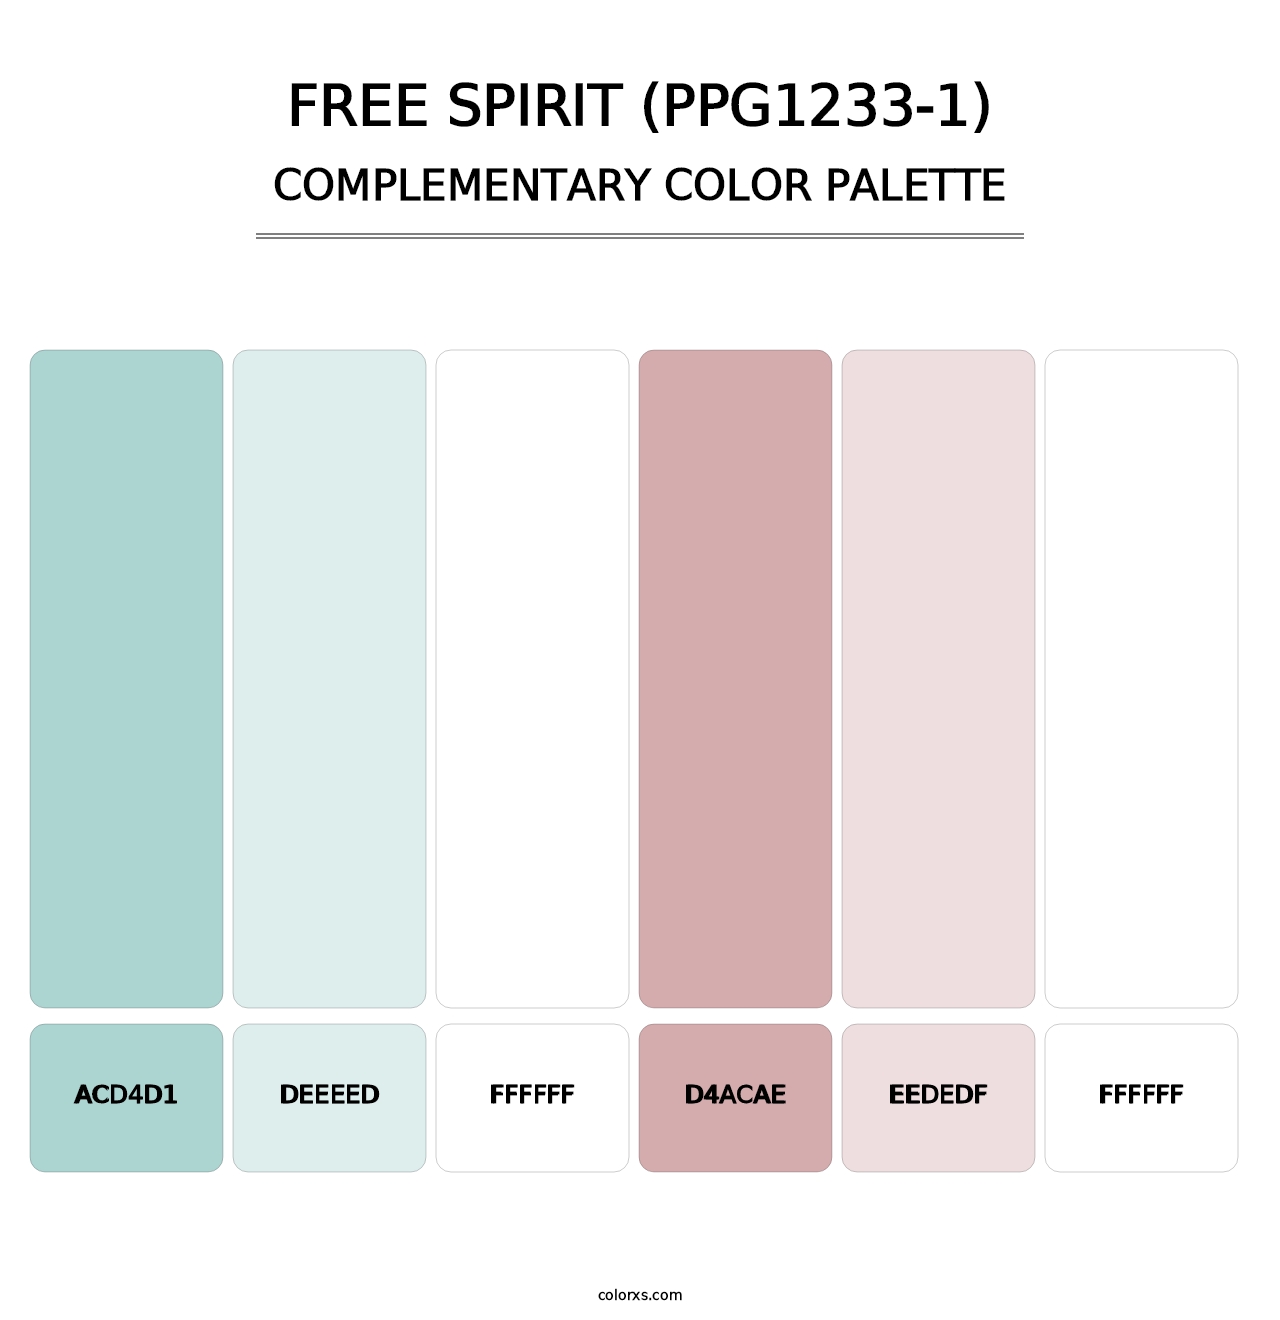 Free Spirit (PPG1233-1) - Complementary Color Palette